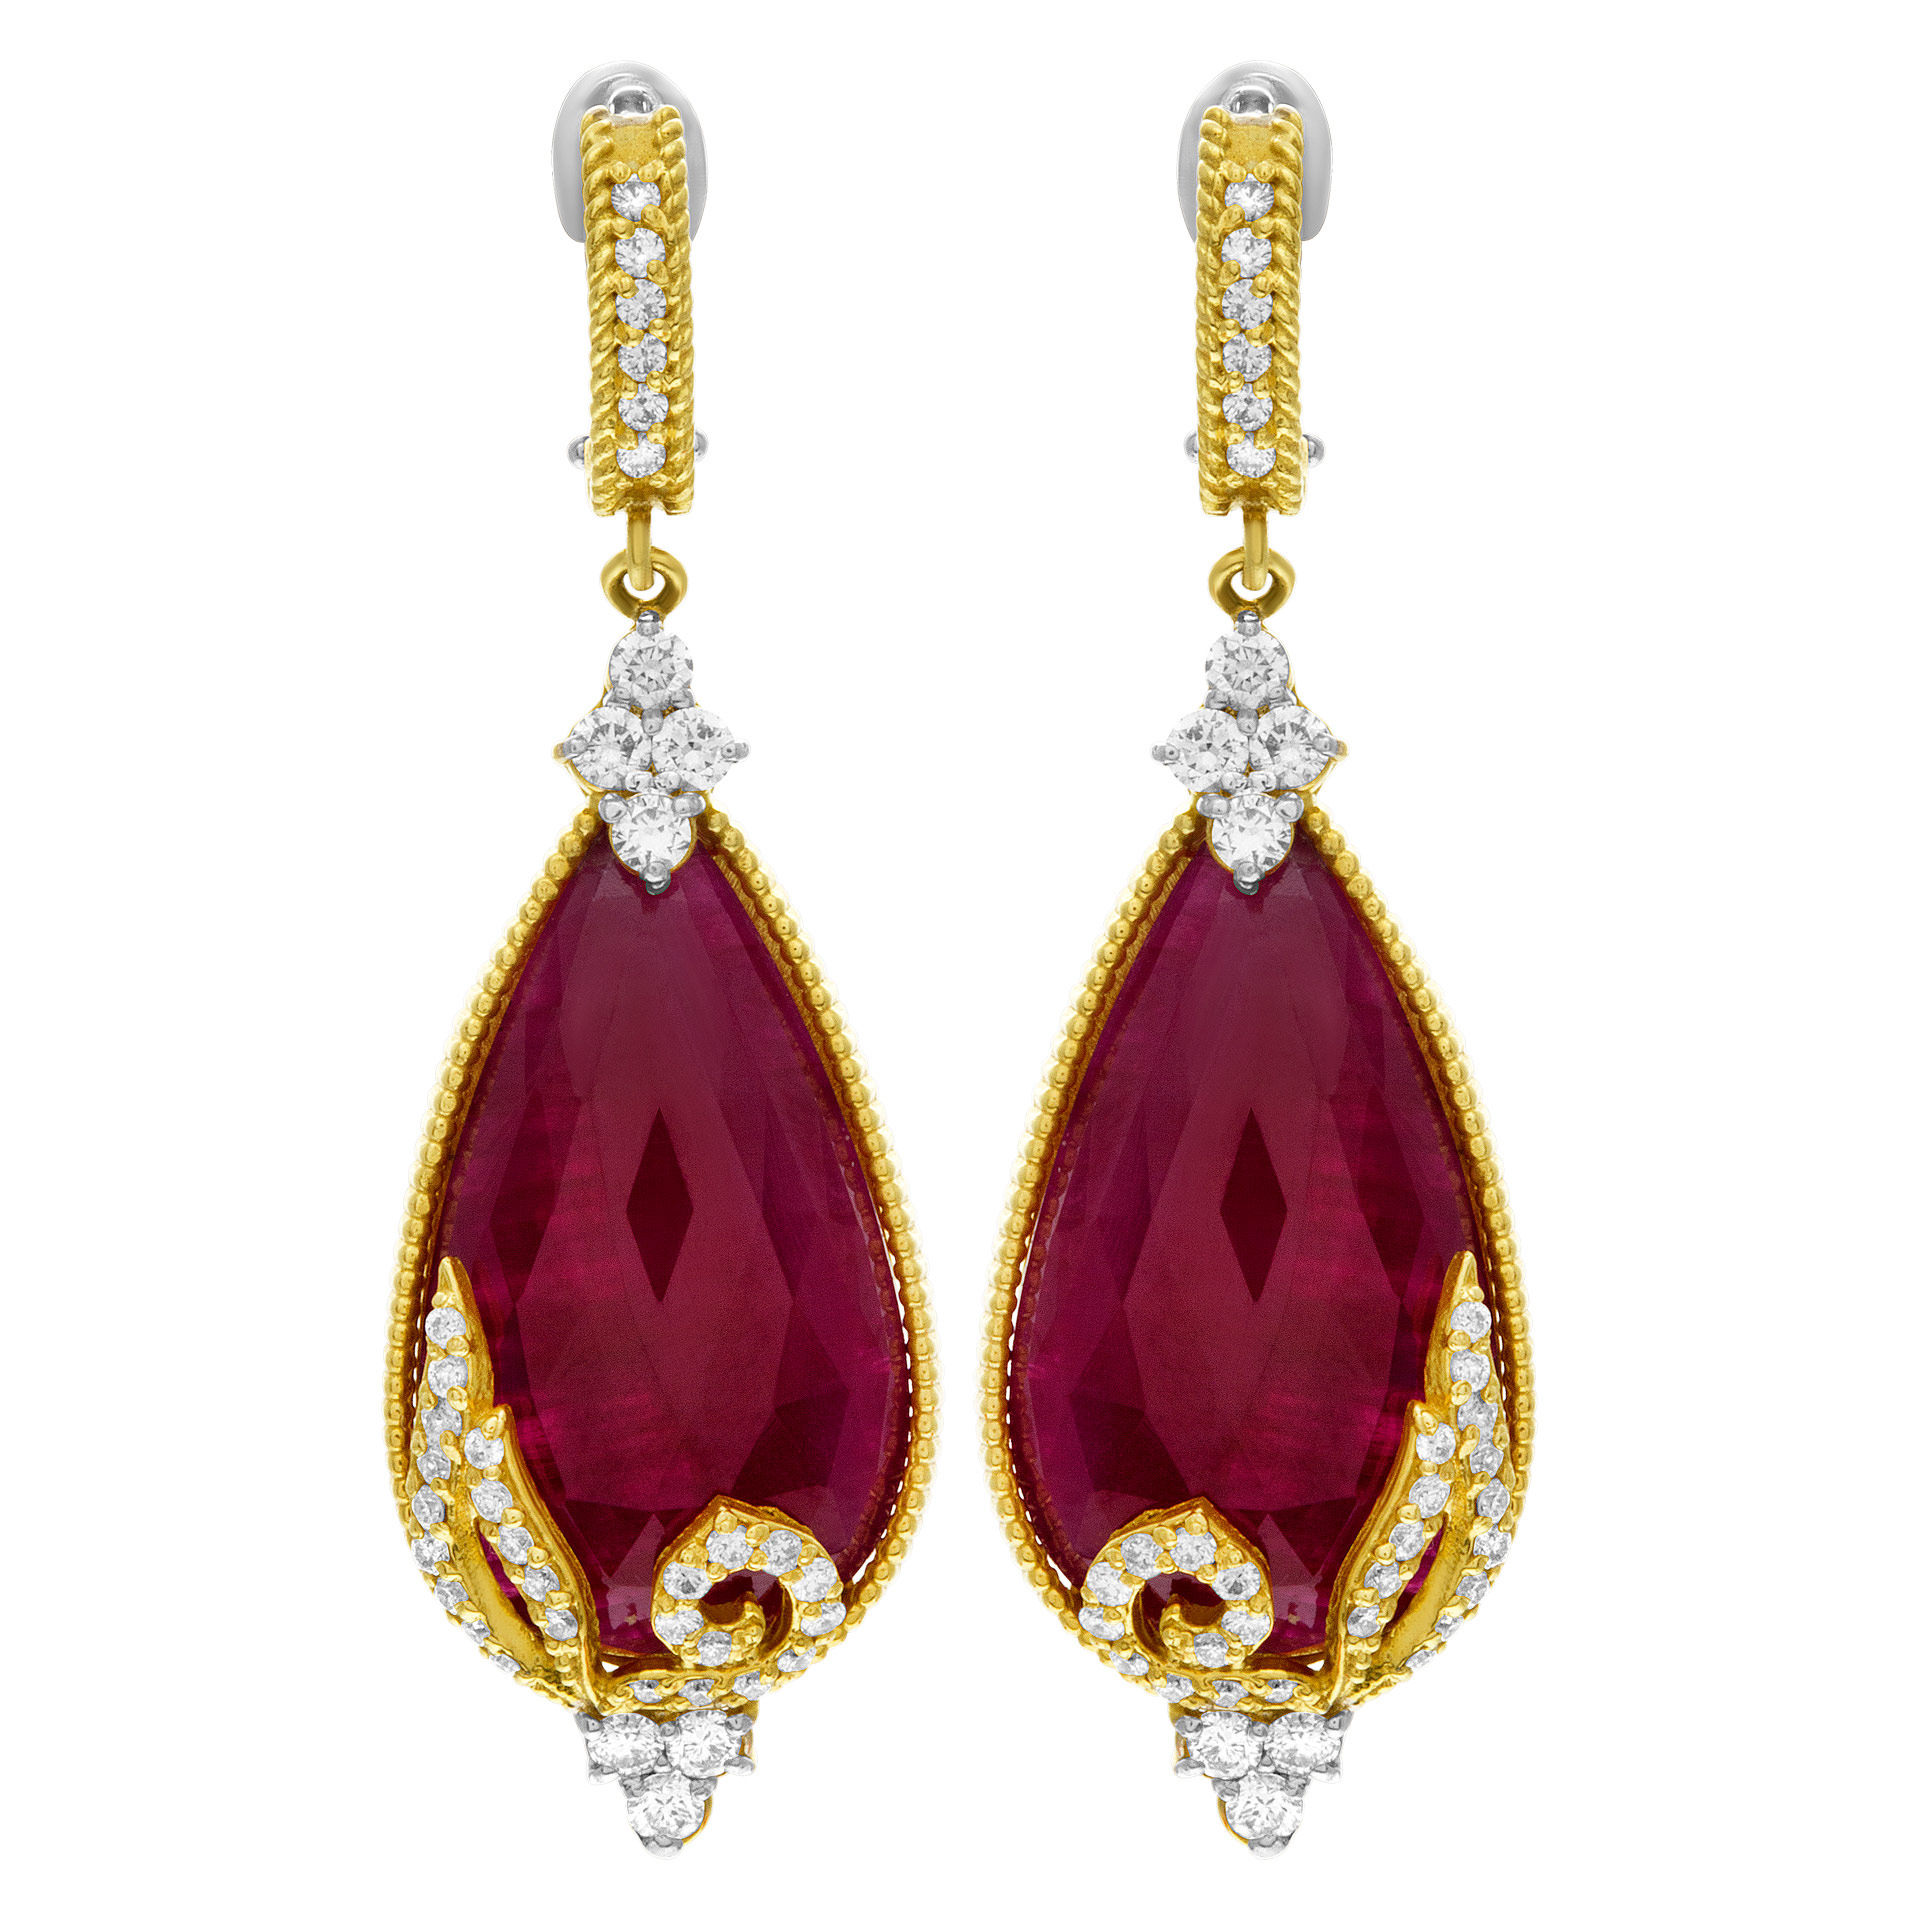 Faceted Ruby slice earrings in 18k with diamond accents, approx. 0.70 cts in diamonds